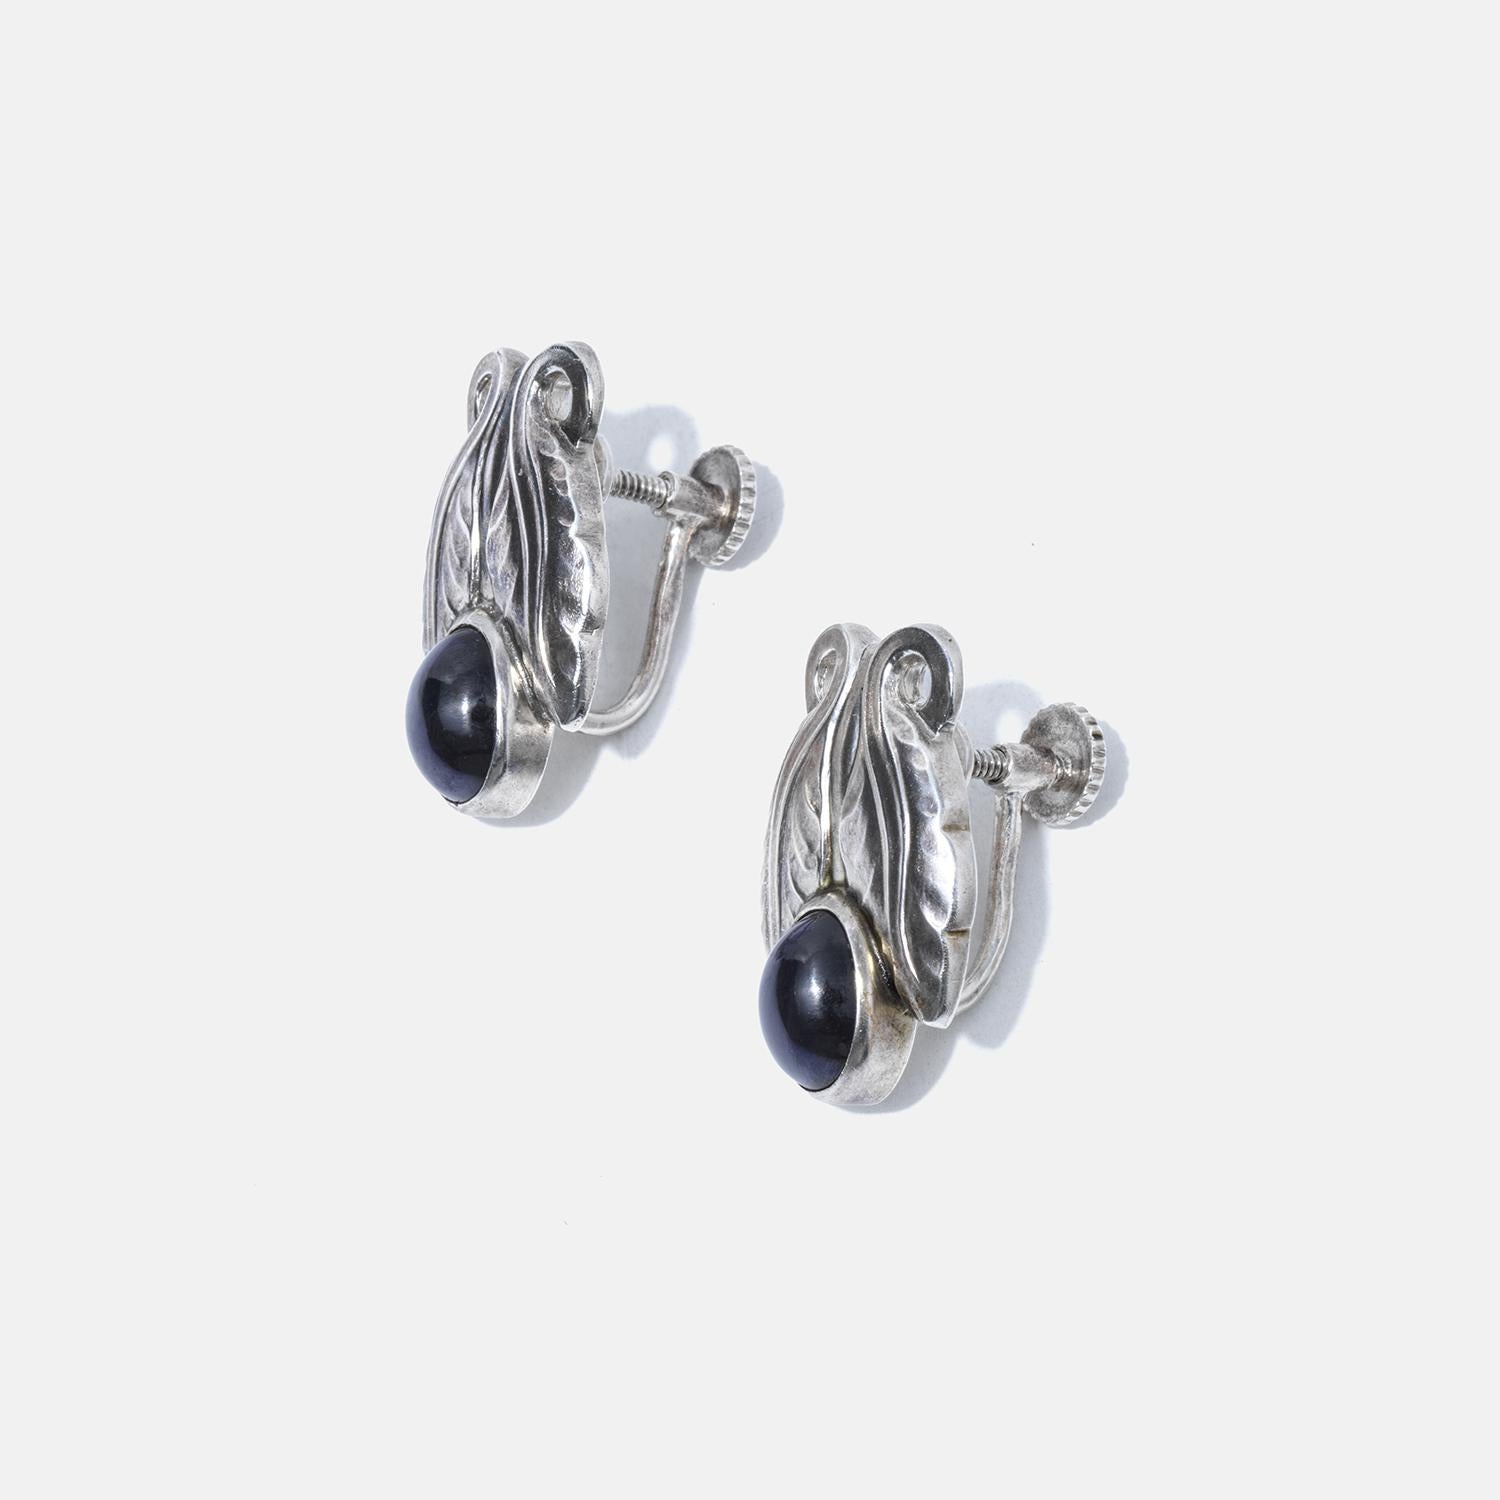 Silver and Blue Stone Earrings by Georg Jensen, Design No 108 In Good Condition For Sale In Stockholm, SE